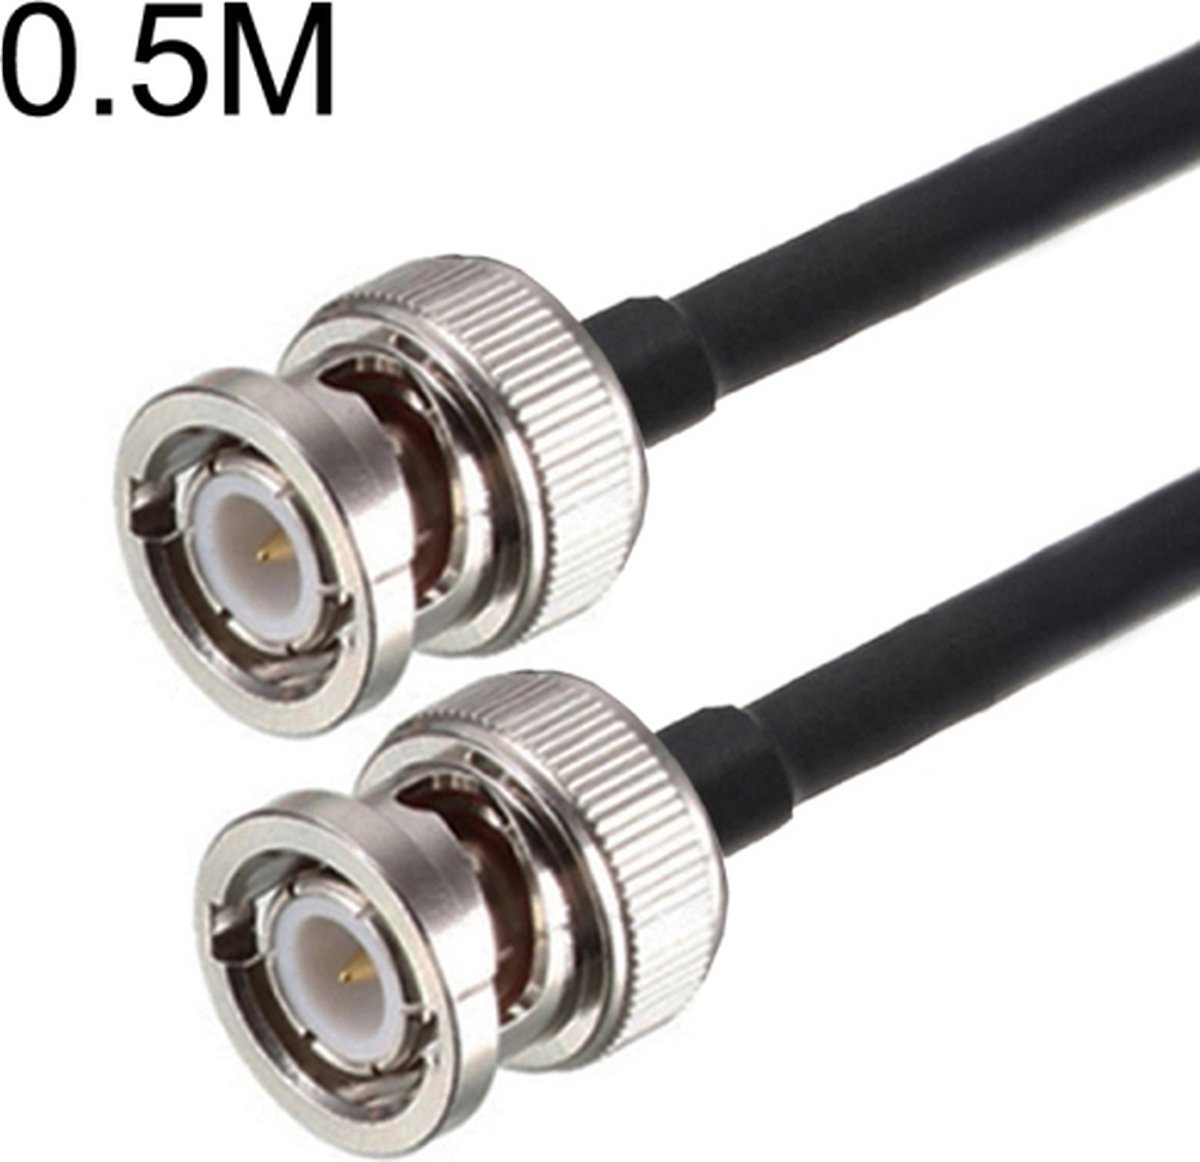 BNC Male To BNC Male RG58 Coaxial Adapter Cable, Cable Length:0.5m